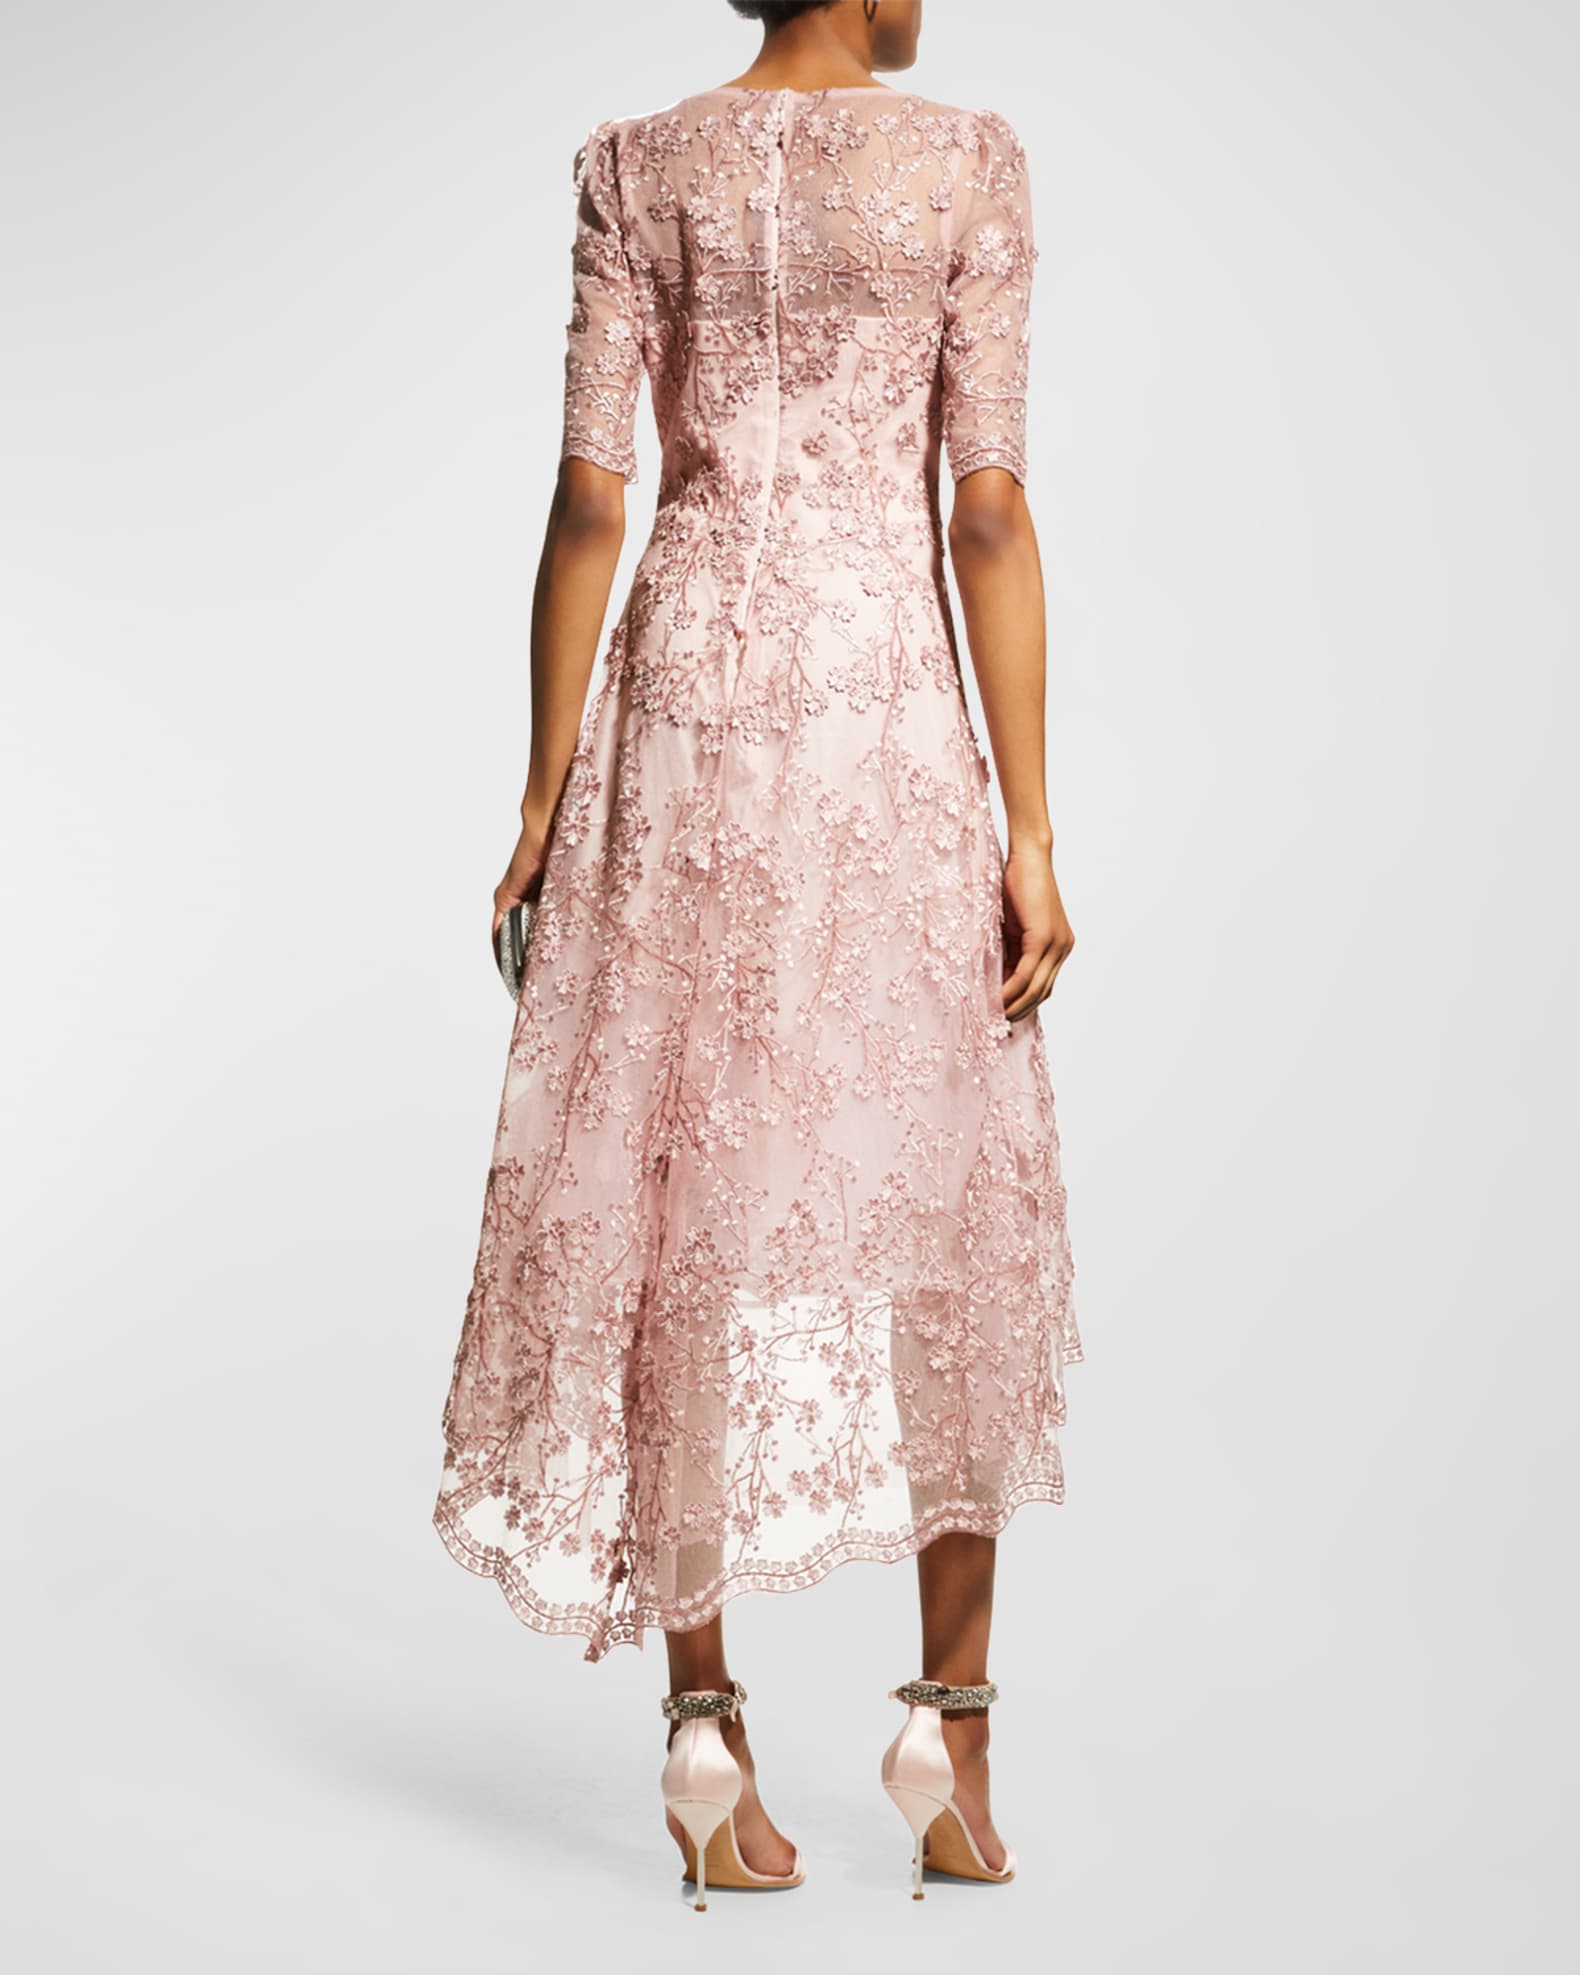 Rickie Freeman for Teri Jon 3D Embellished Lace High-Low Tulle Dress ...